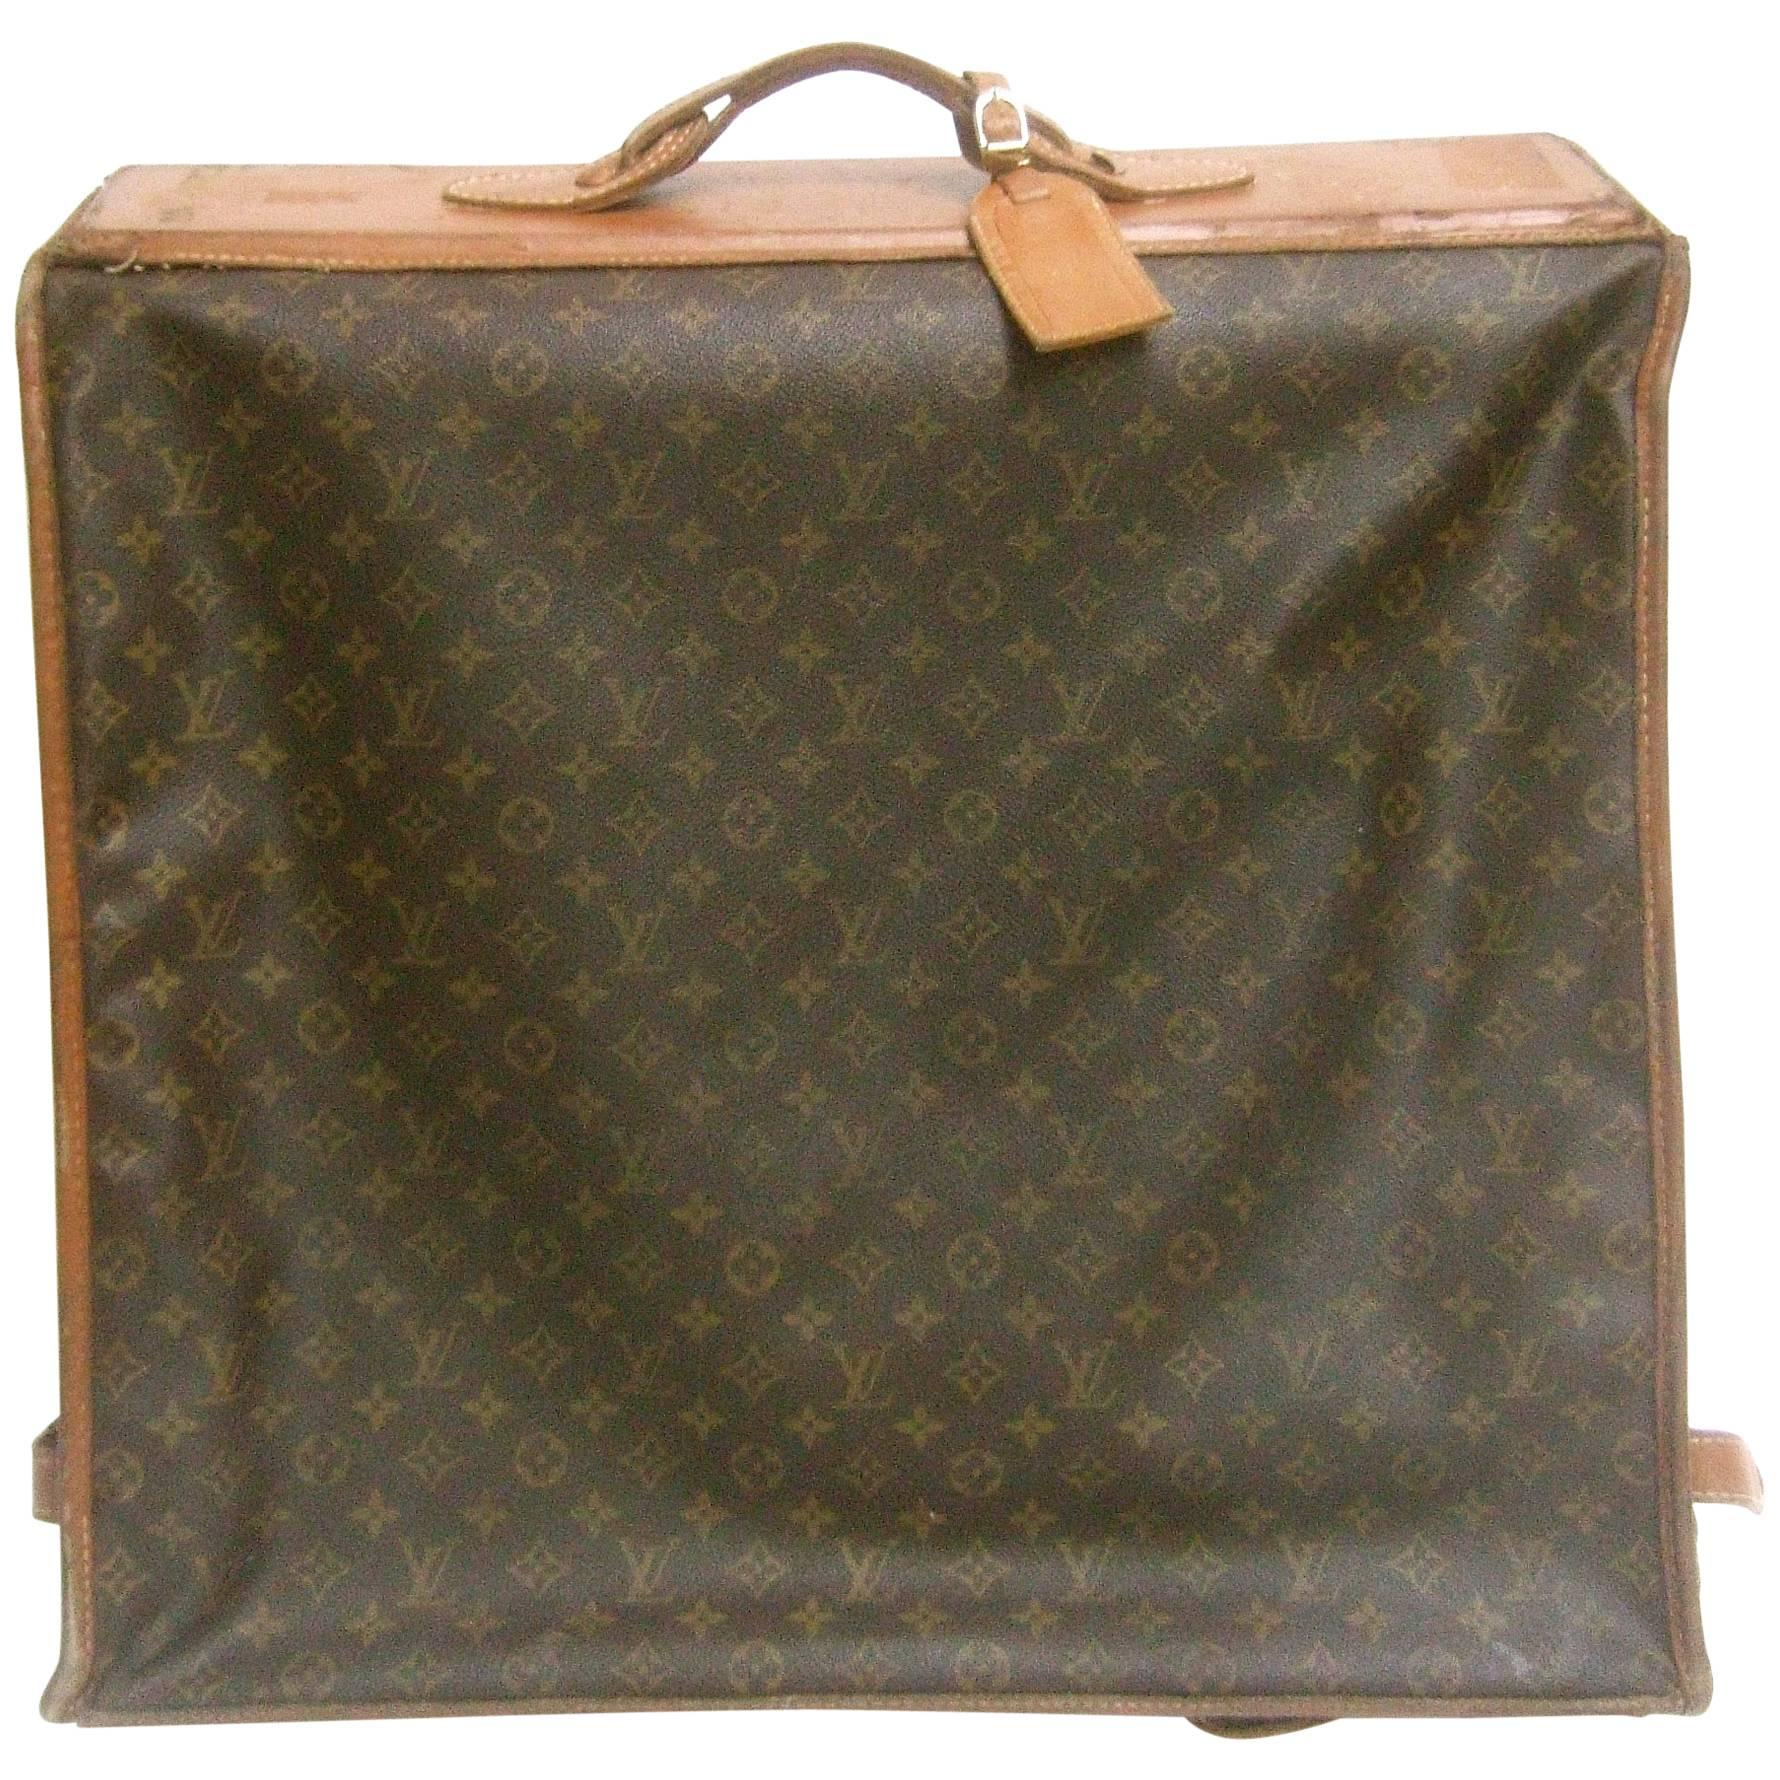 Louis Vuitton Shabby Chic Well Loved Garment Travel Case c 1970s